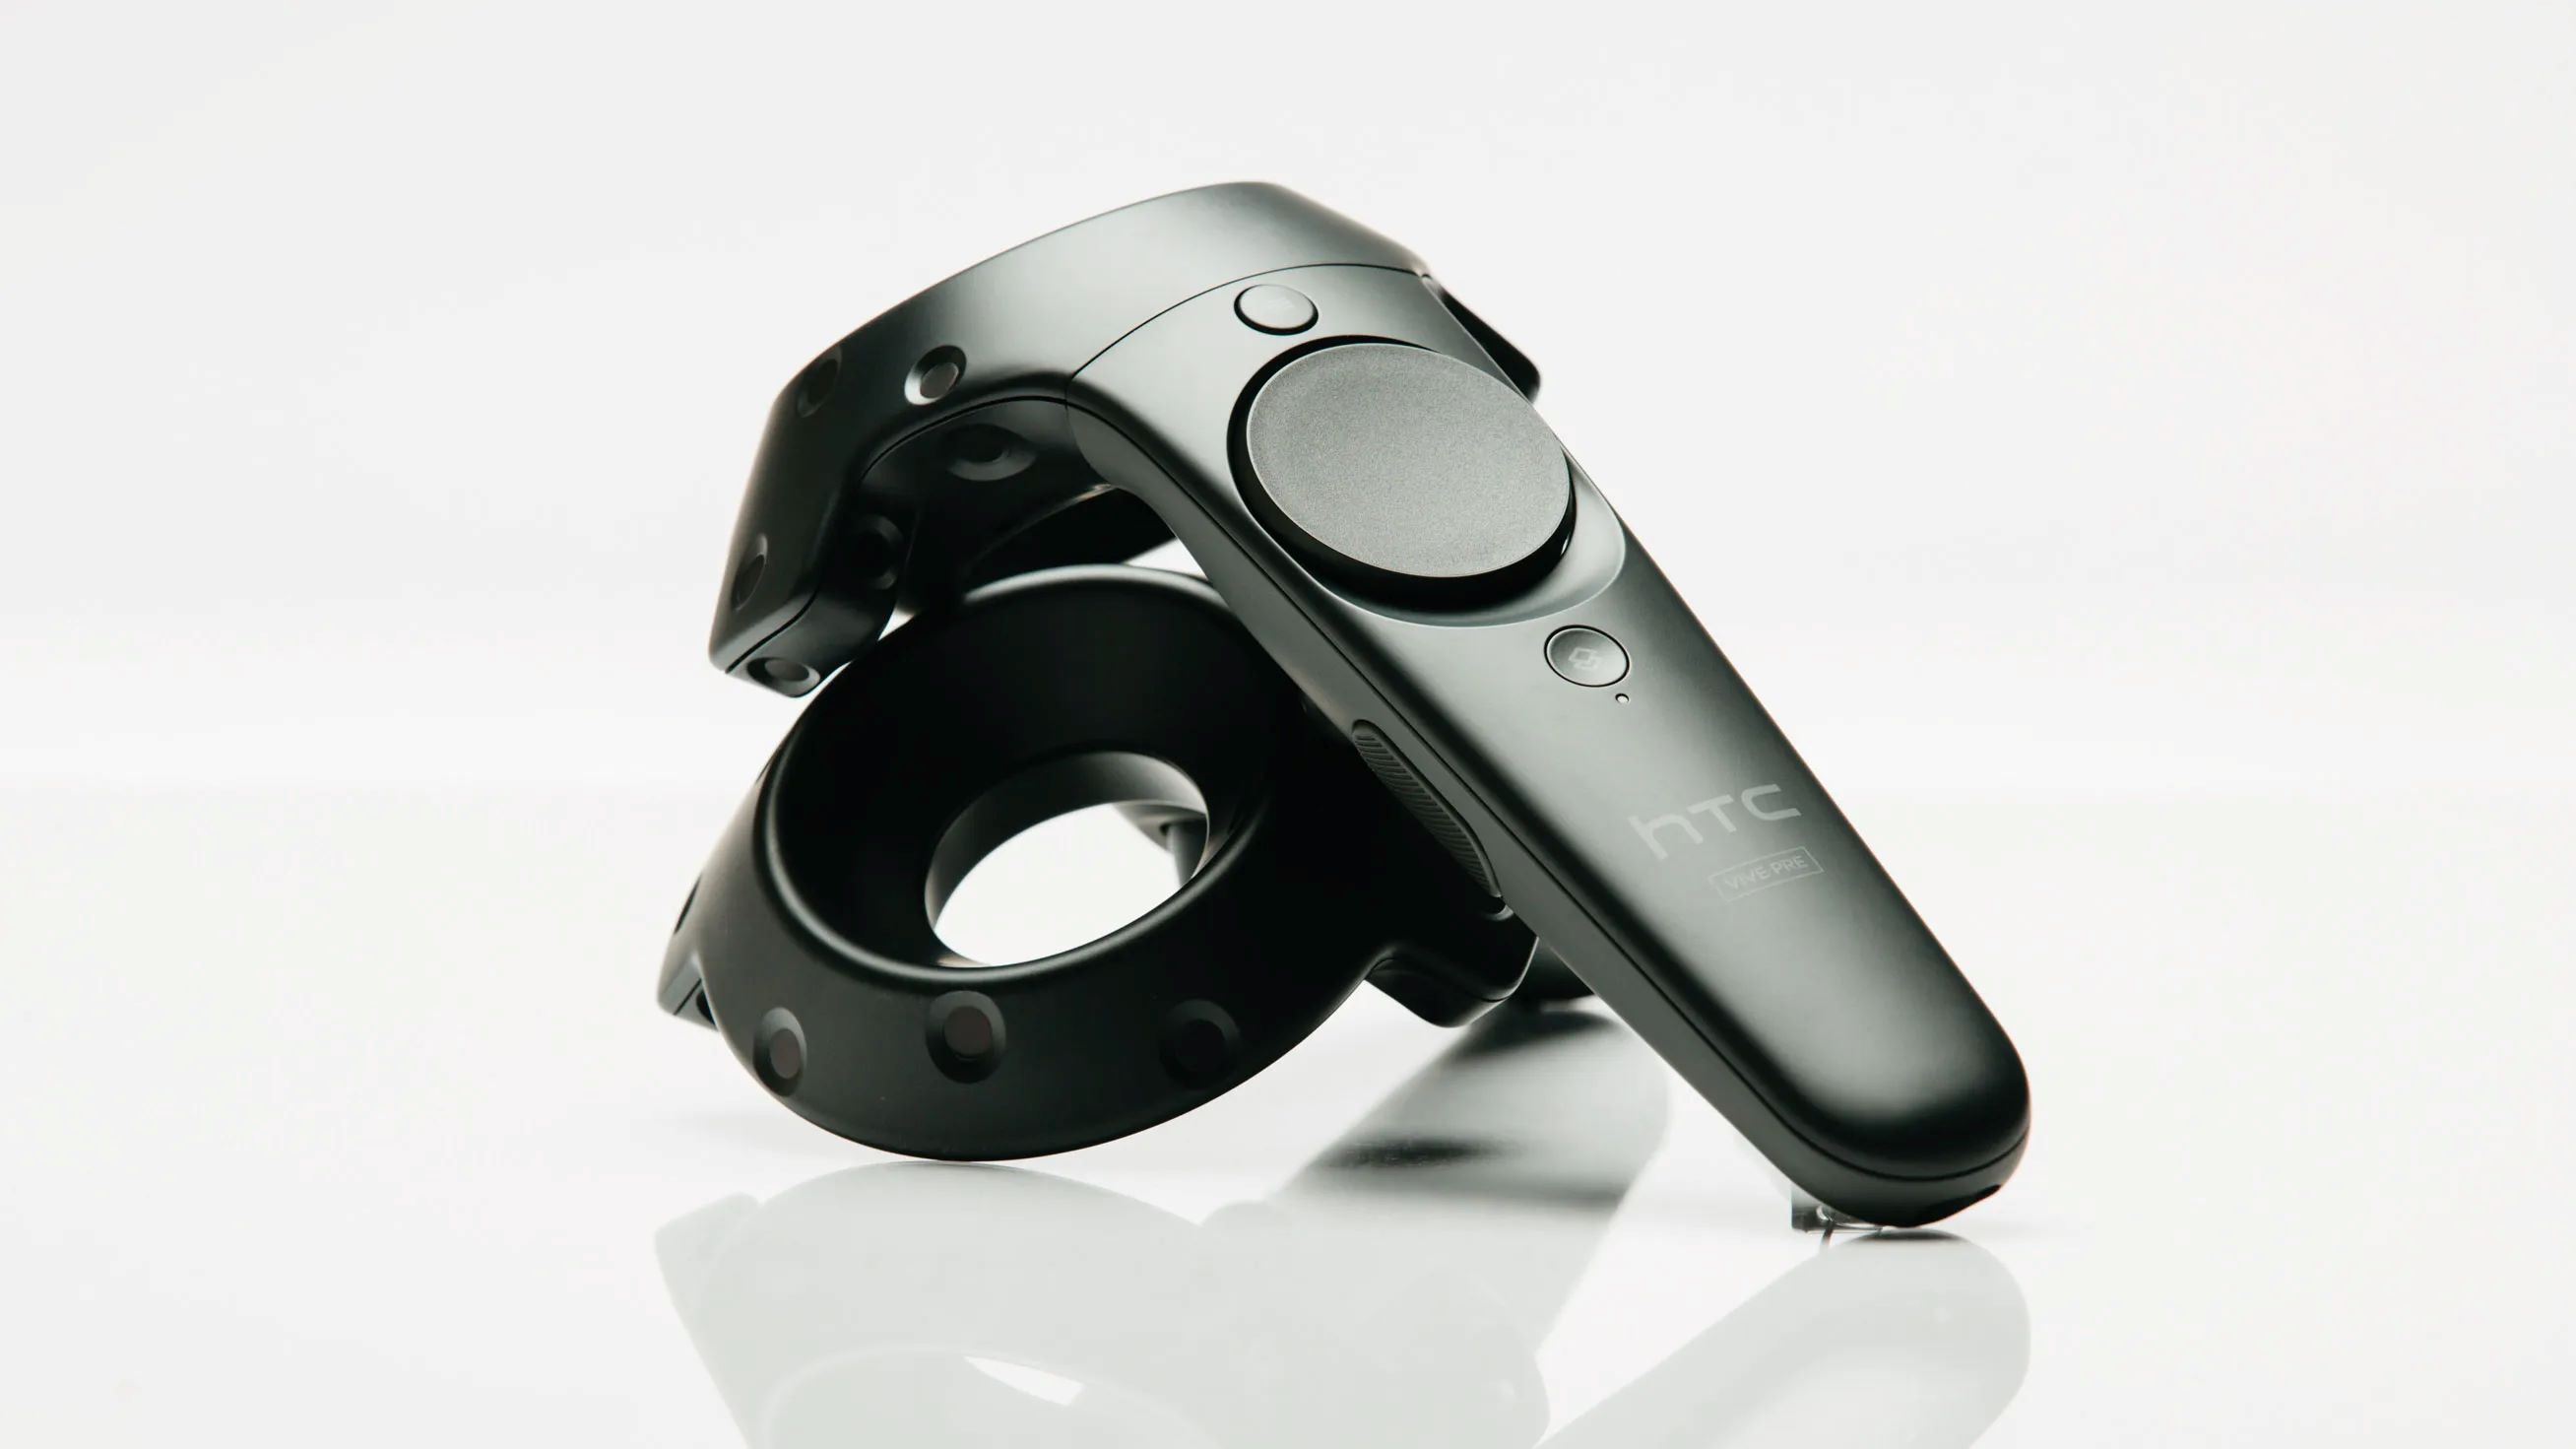 How Does The HTC Vive Controller Work